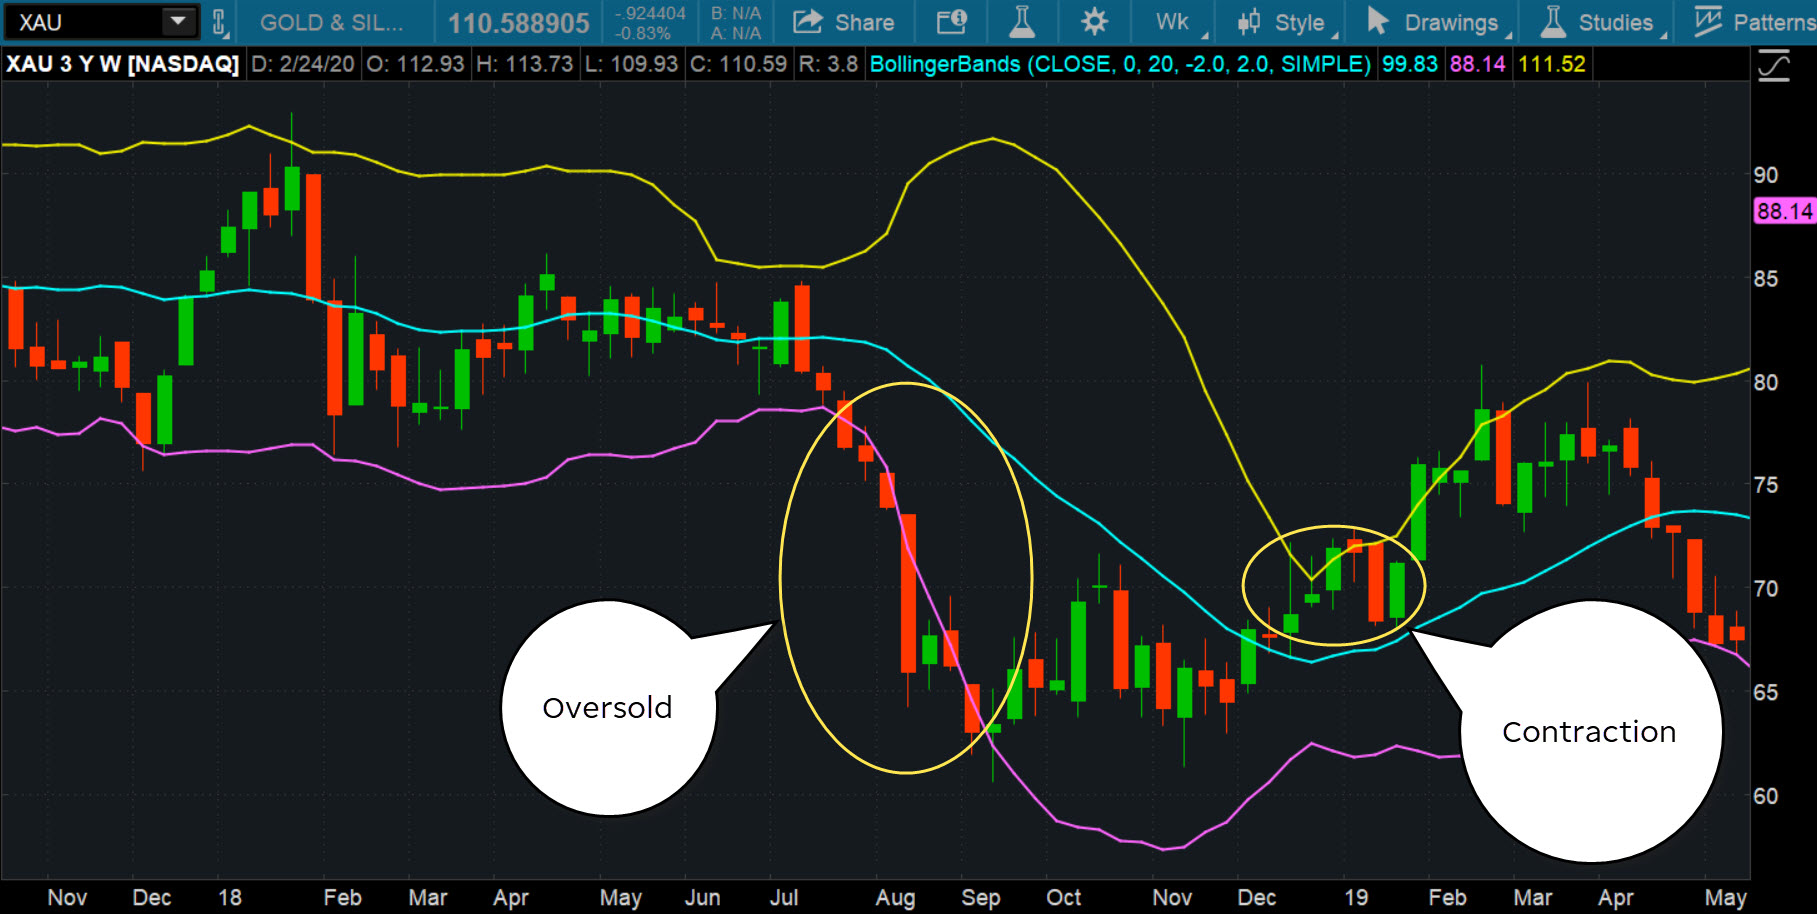 Bollinger Bands on a price chart for gold & silver indices